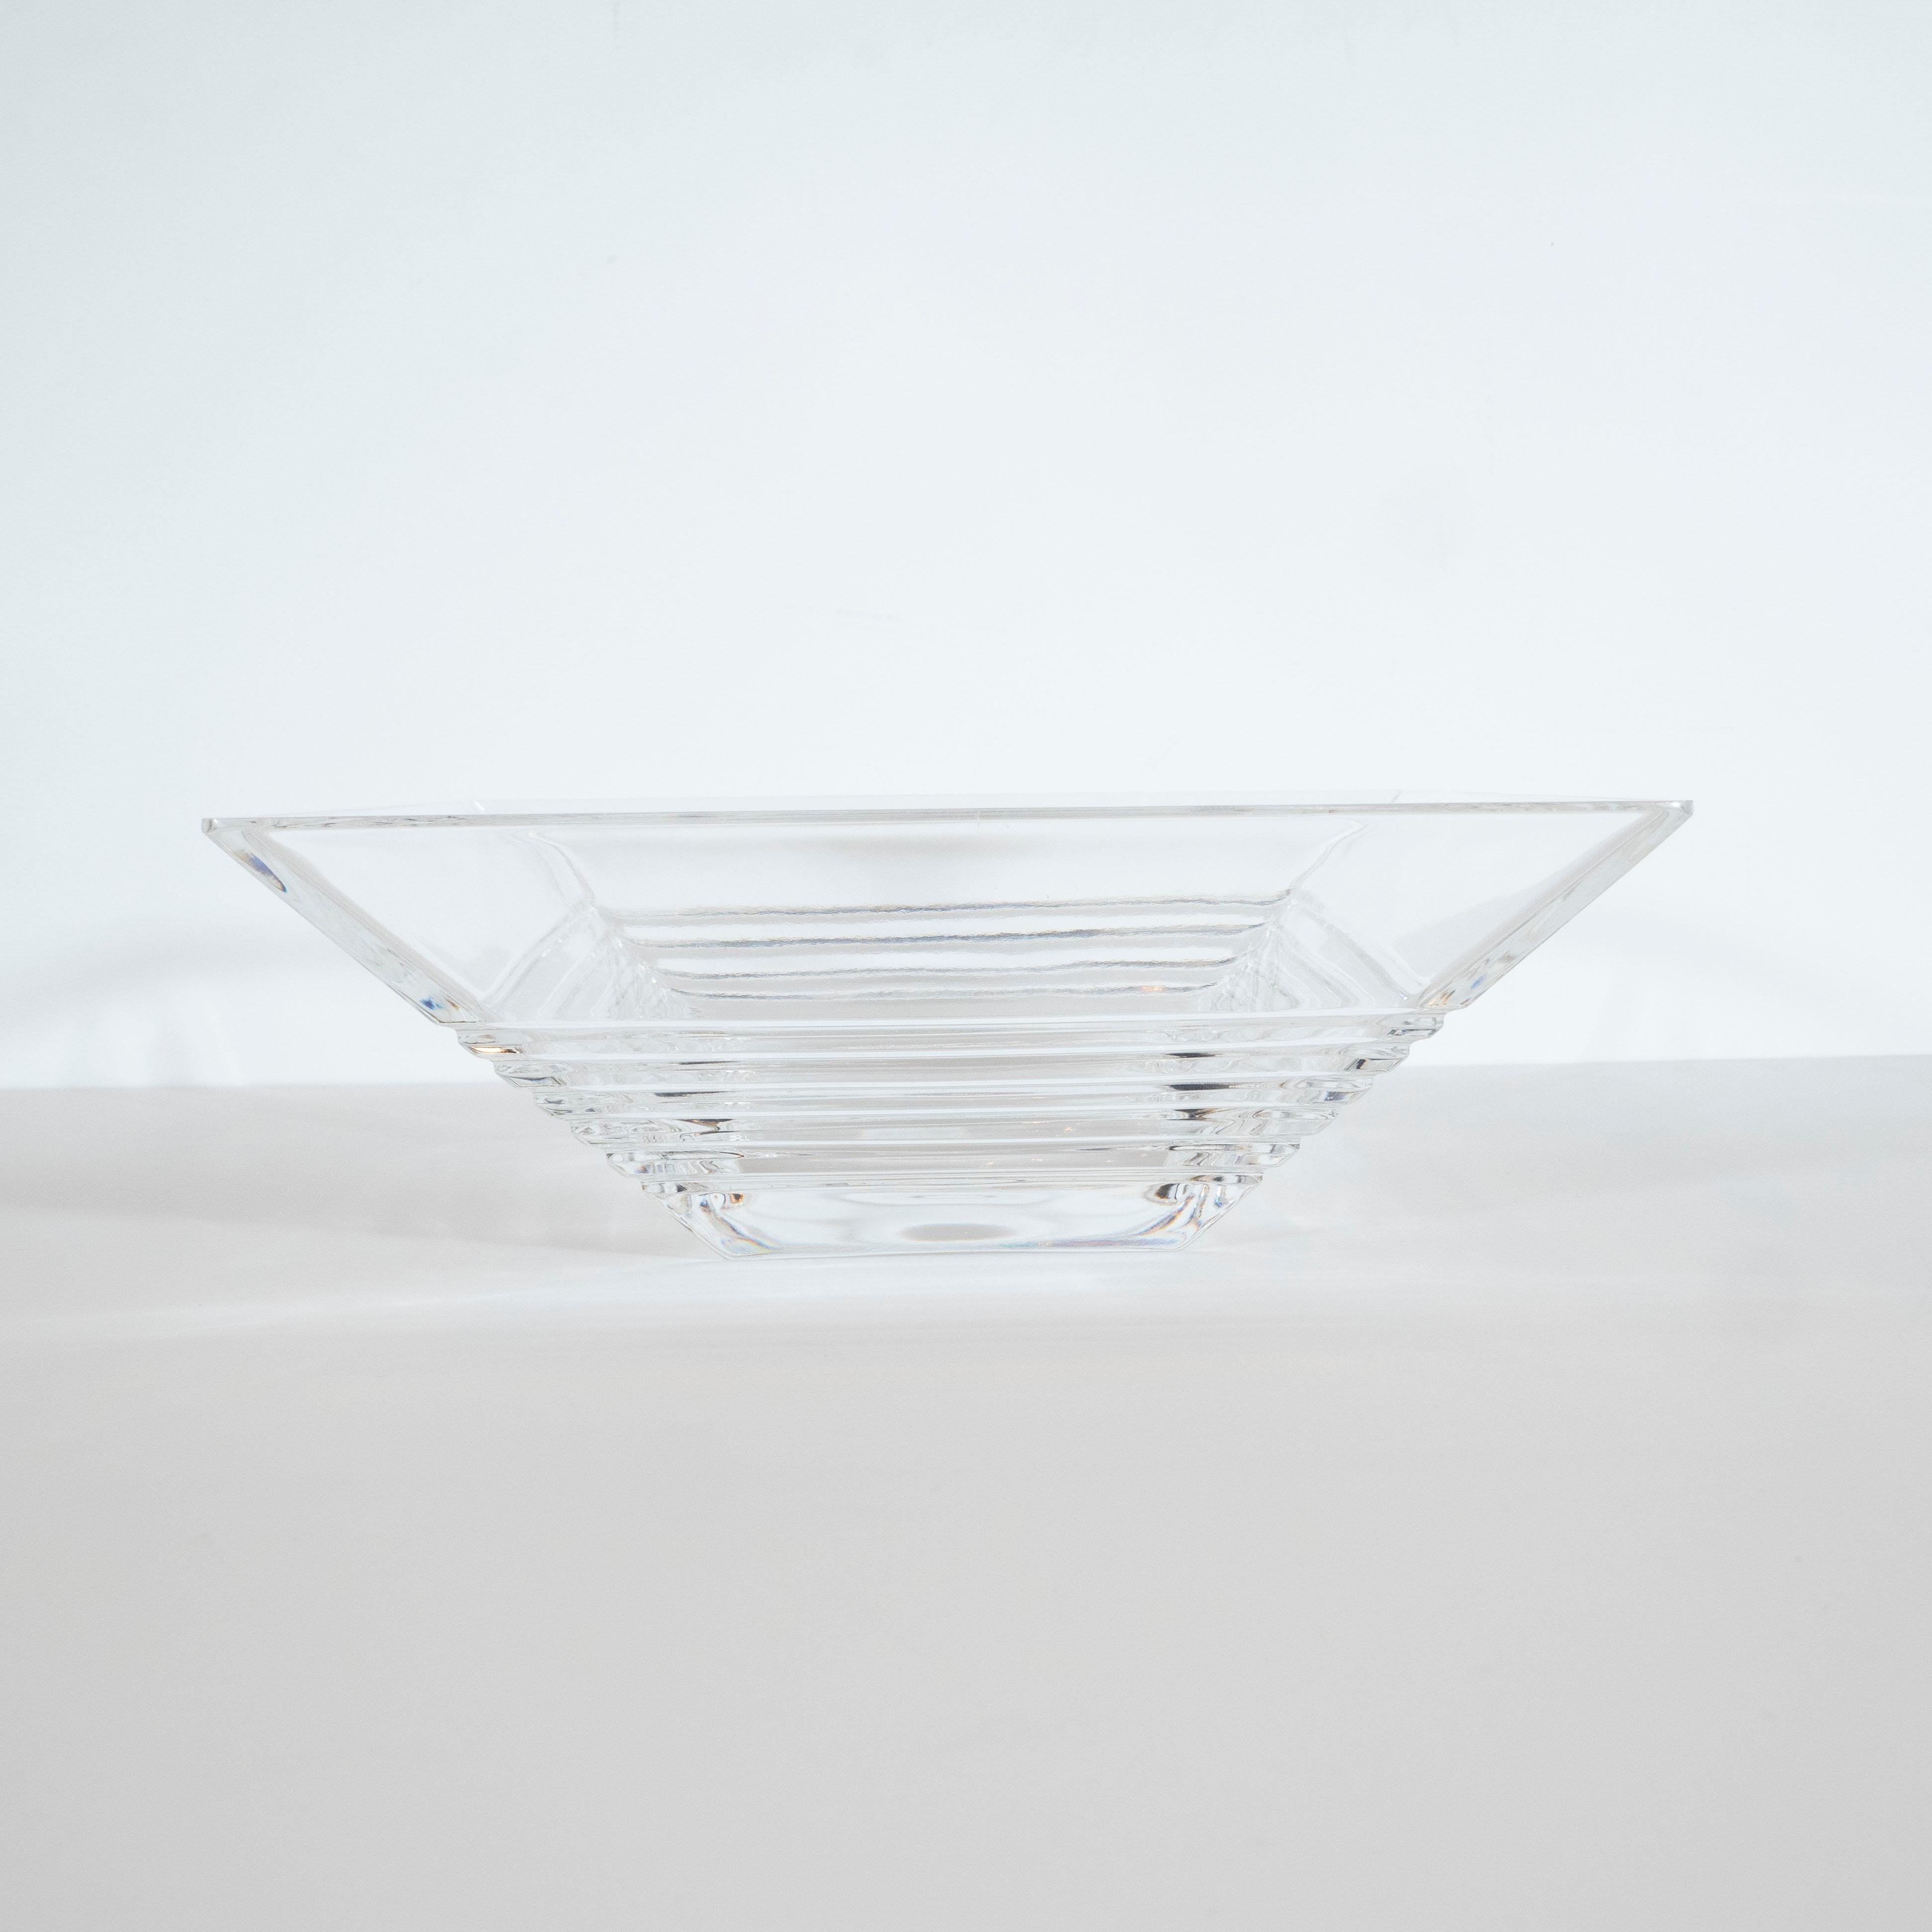 This elegant Art Deco style crystal decorative bowl was realized by Tiffany & Co. One of America's premiere luxury makers of the finest silver and precious objects since 1837, circa 1980. Inspired by skyscraper style Art Deco designs, the bowl